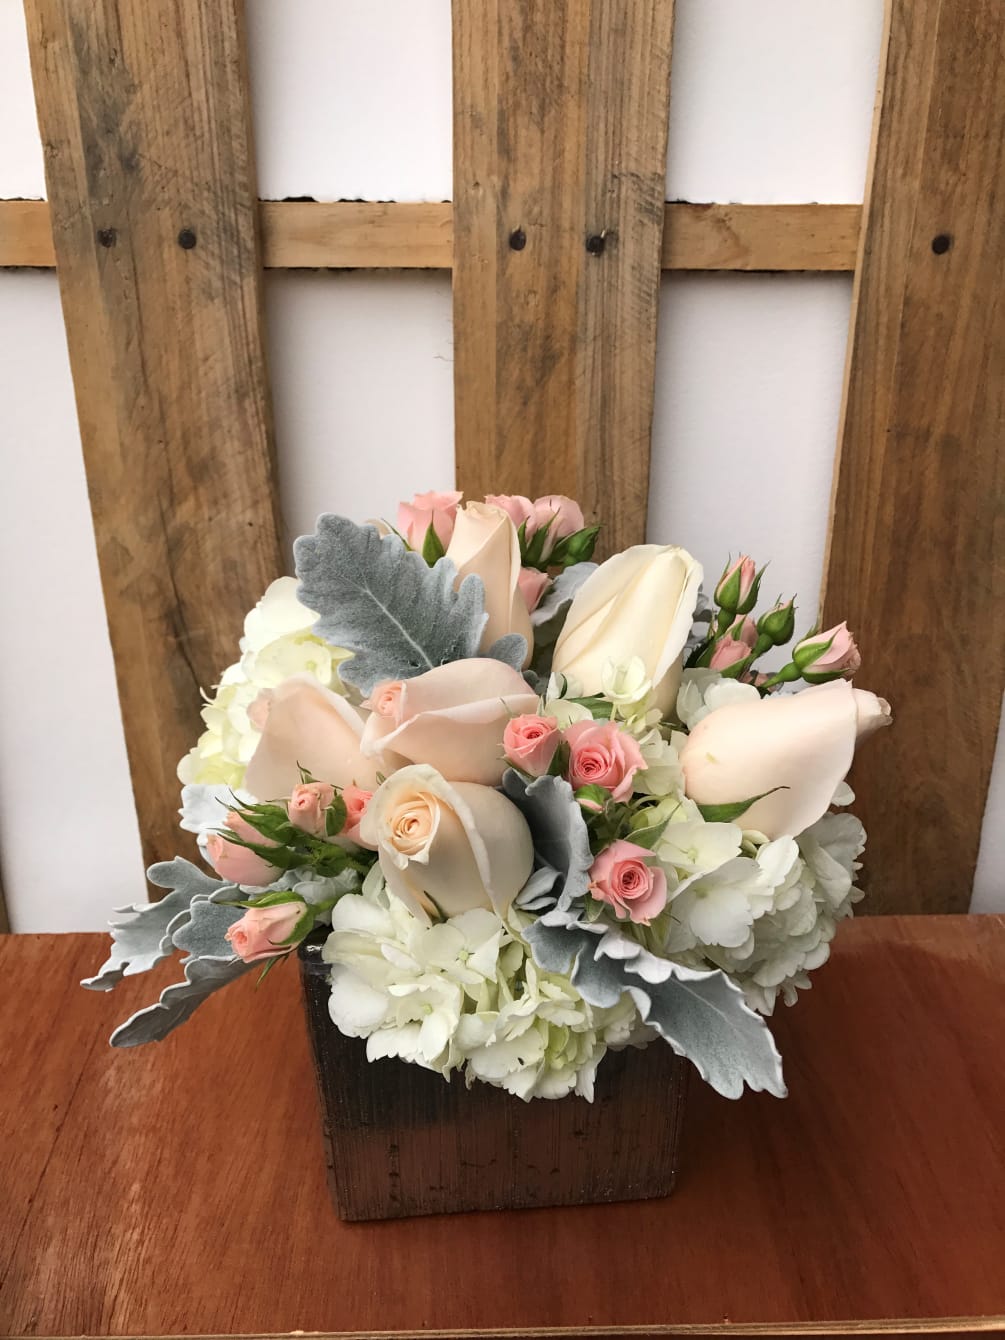 Blush roses, spray roses, hydrangea, and dusty miller.